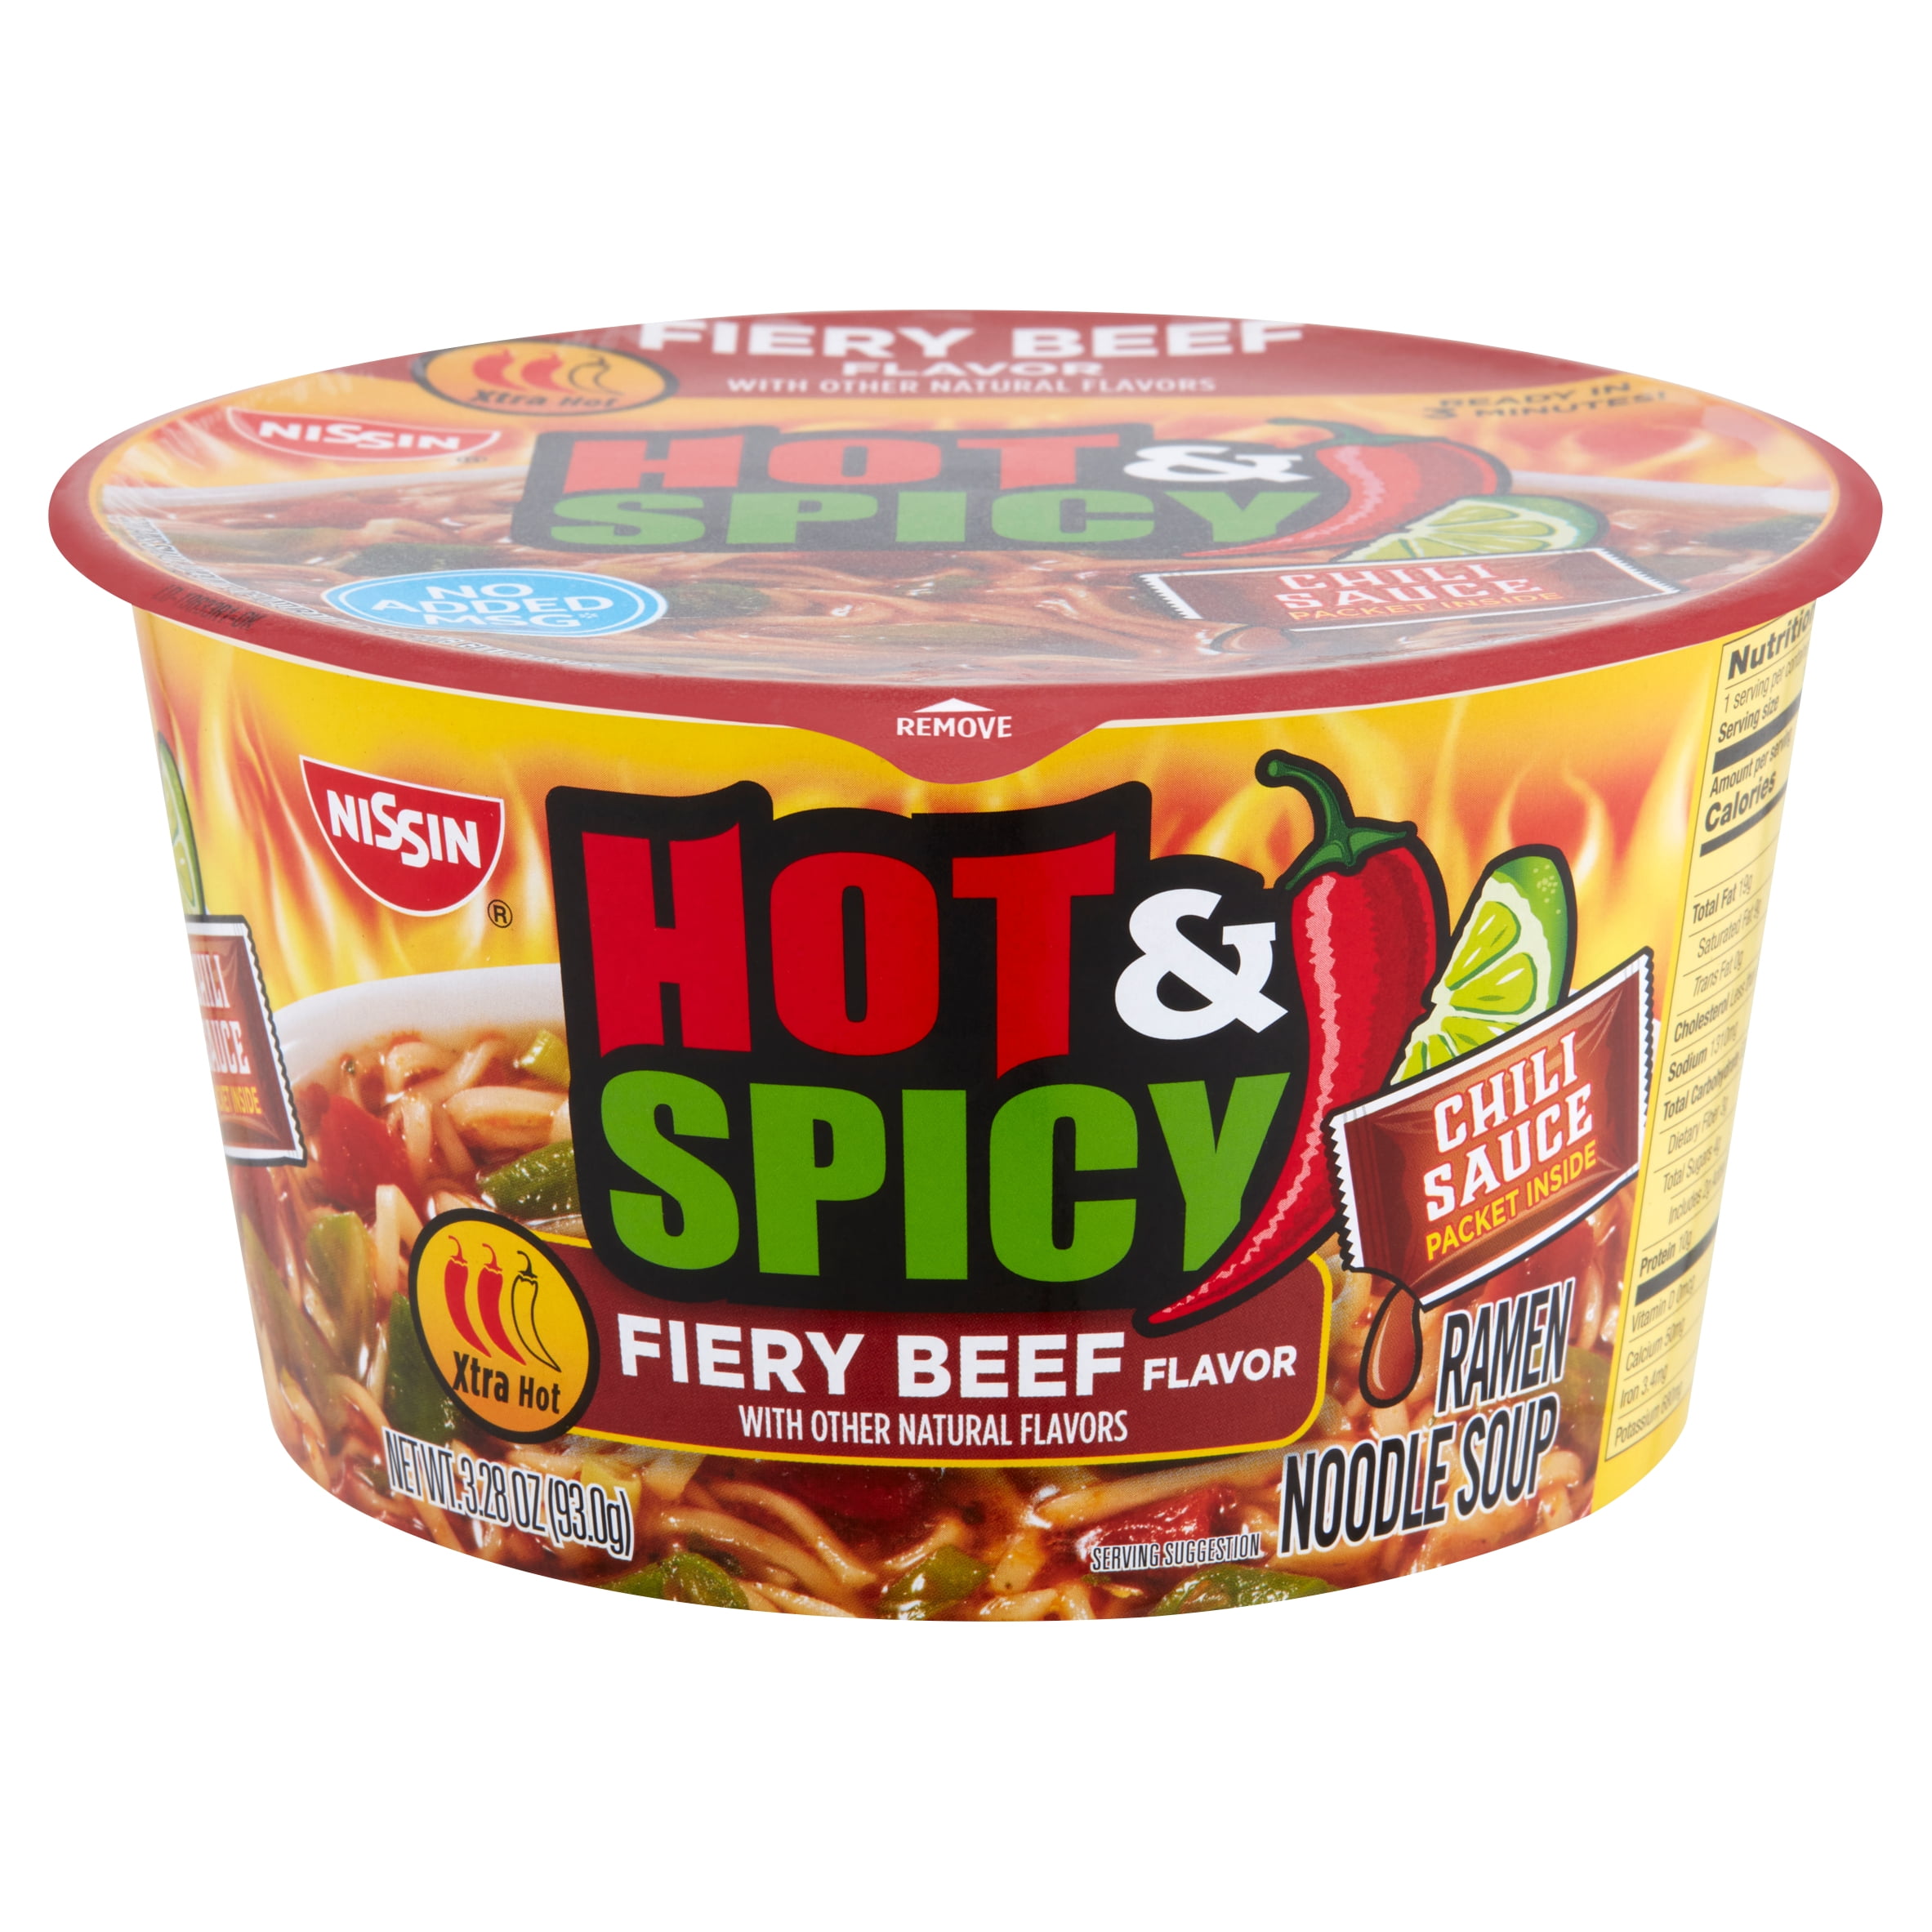 Hot and spicy maruchan